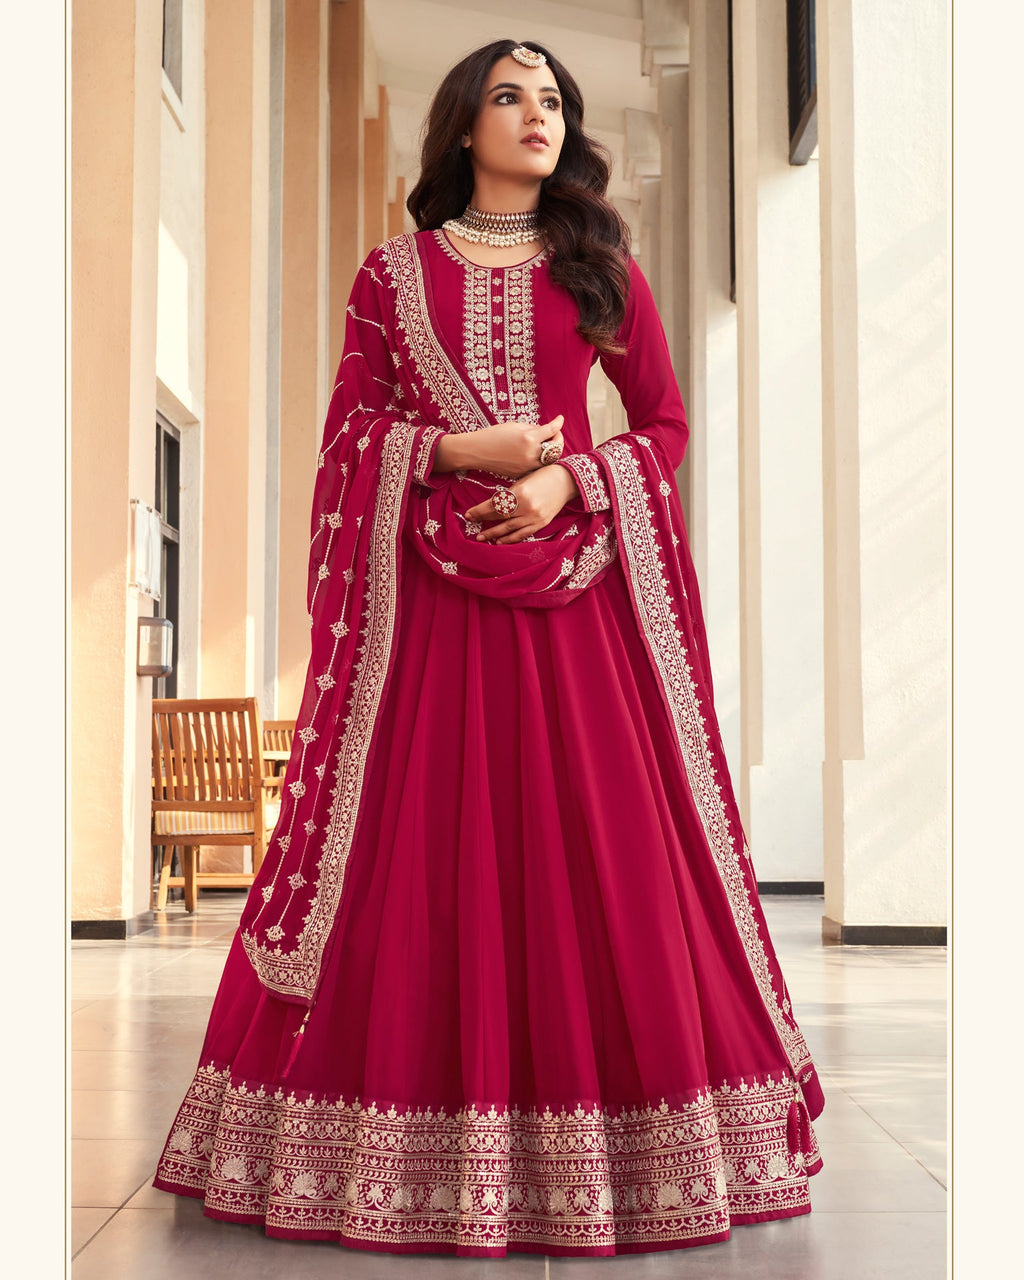 Mehak Boutique is a one stop shop for Indian Ethnic Wear For Women Men